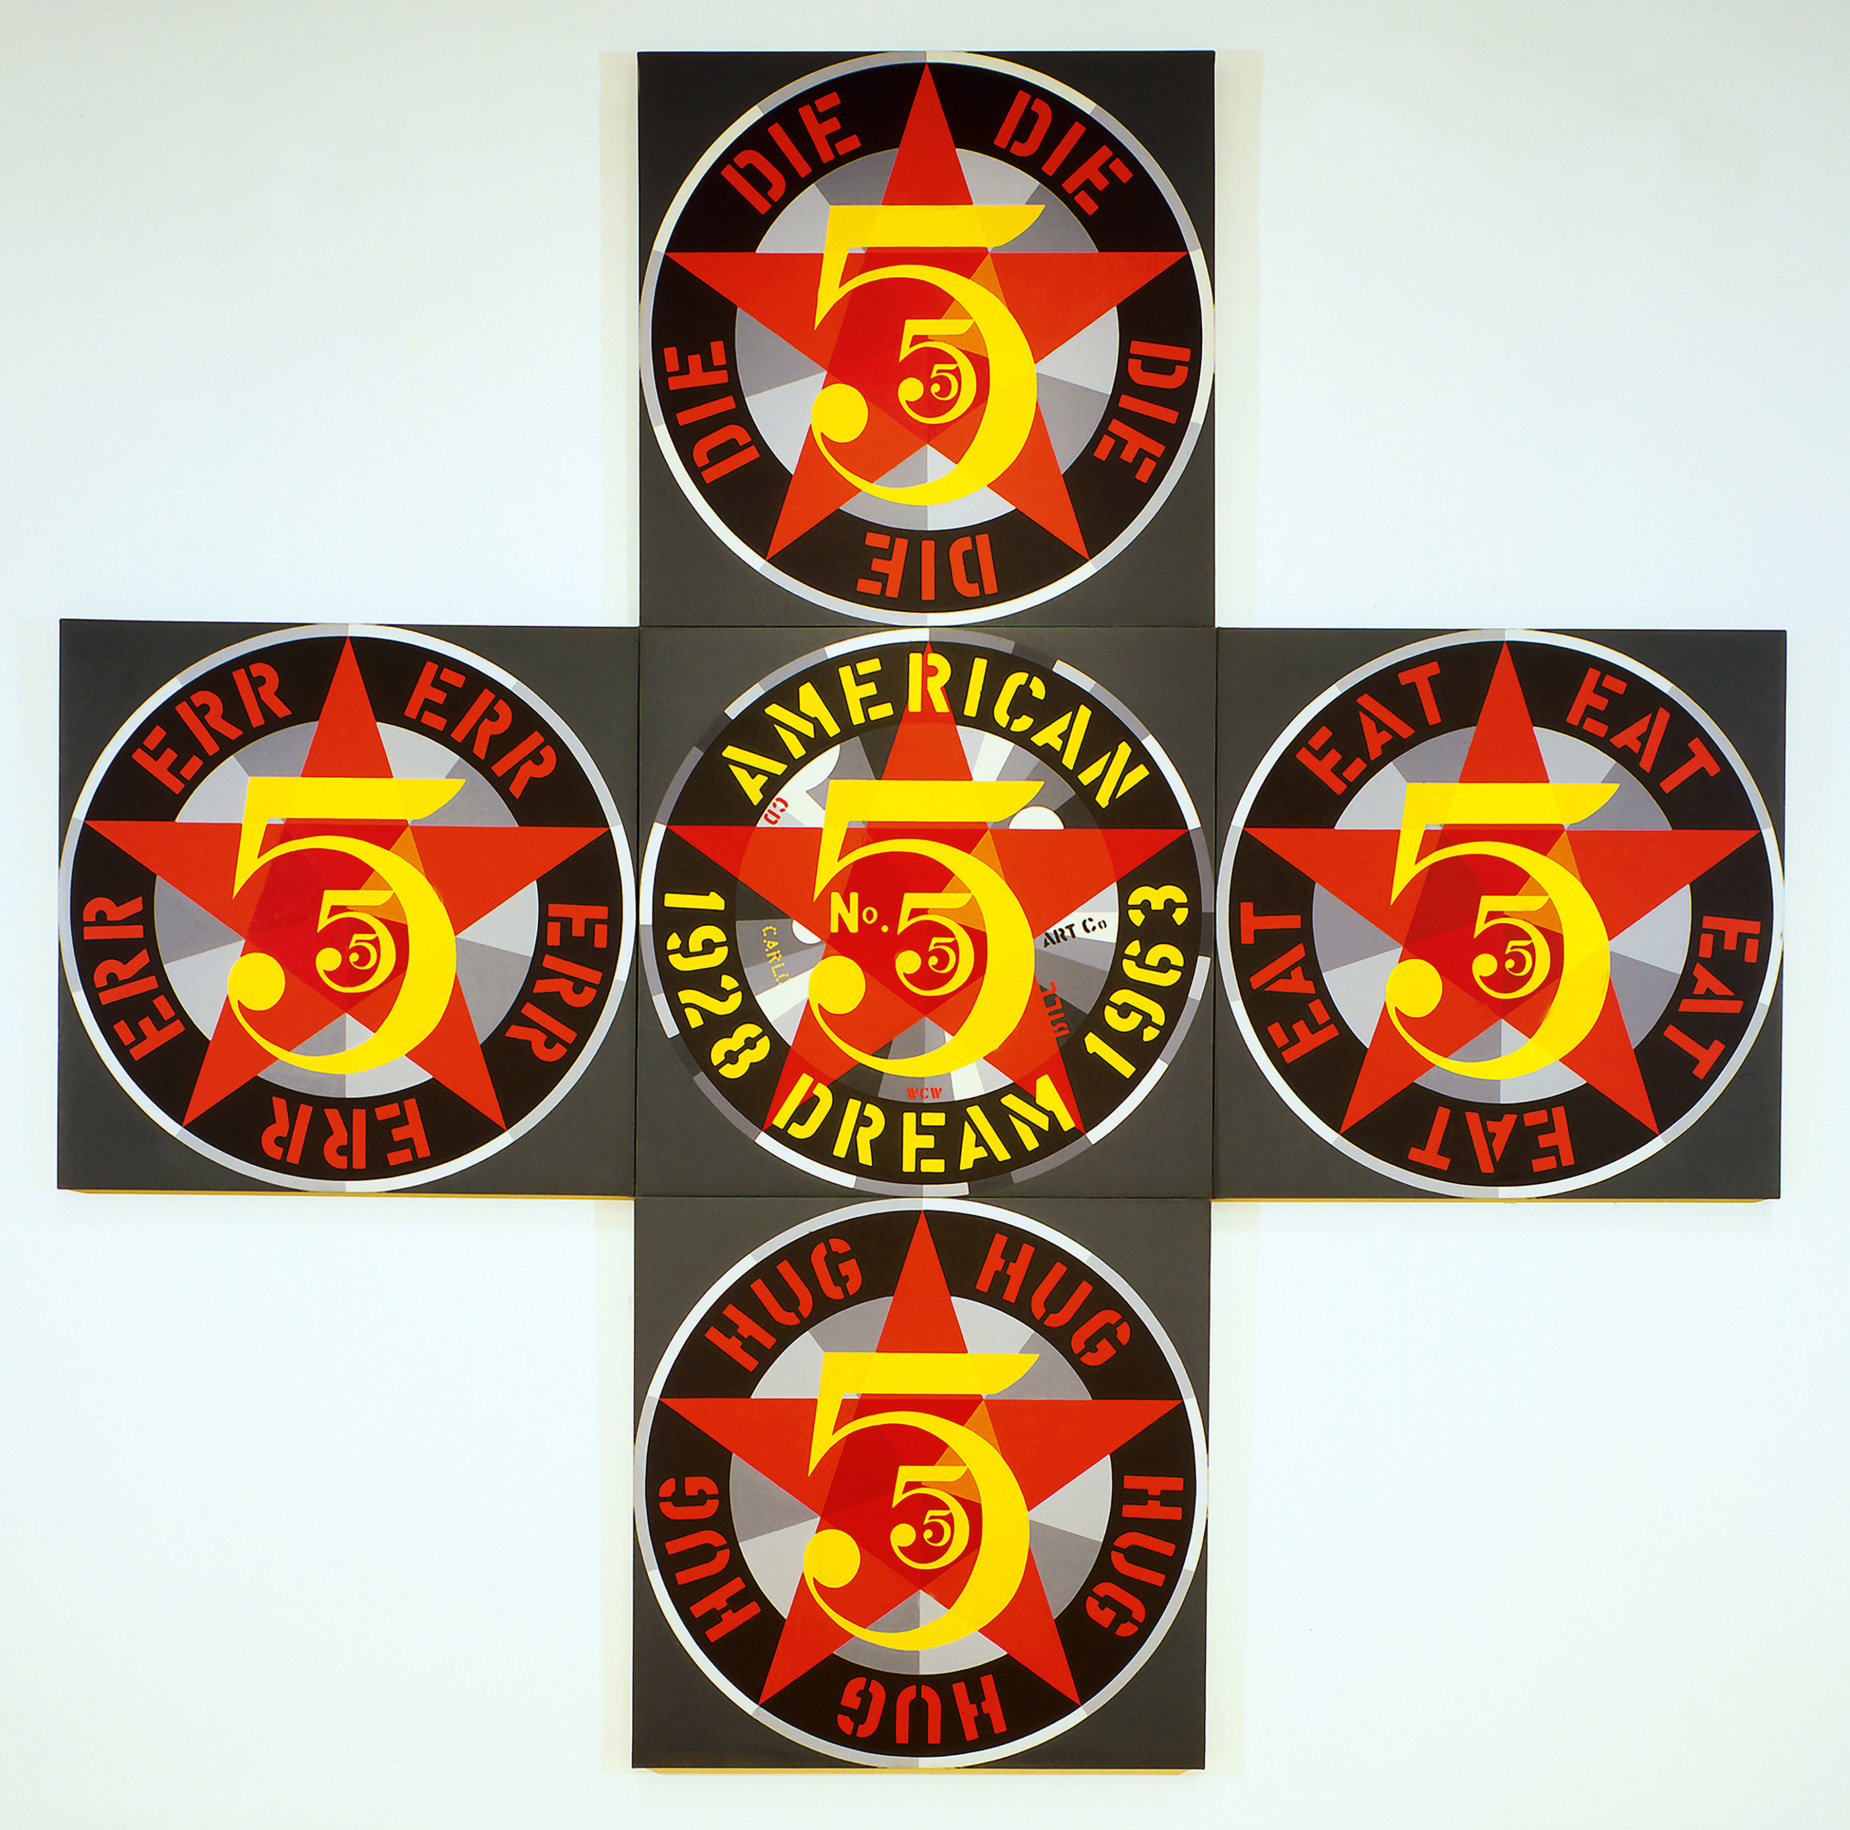 The Demuth American Dream No. 5 is a cross shaped painting made up five panels and measuring 144 by 144 inches overall. Each panel has a dark gray ground and holds three yellow number fives in three sizes against a red star. Each panel has a black ring of text around the fives. The central ring has the text American Dream and the dates 1928 and 1963 in yellow. Each other ring contains a word painted in red which appears five times, in between each arm of the star. The word in the top panel is DIE, in the right panel it's EAT, in the lower panel HUG, and in the left panel ERR.